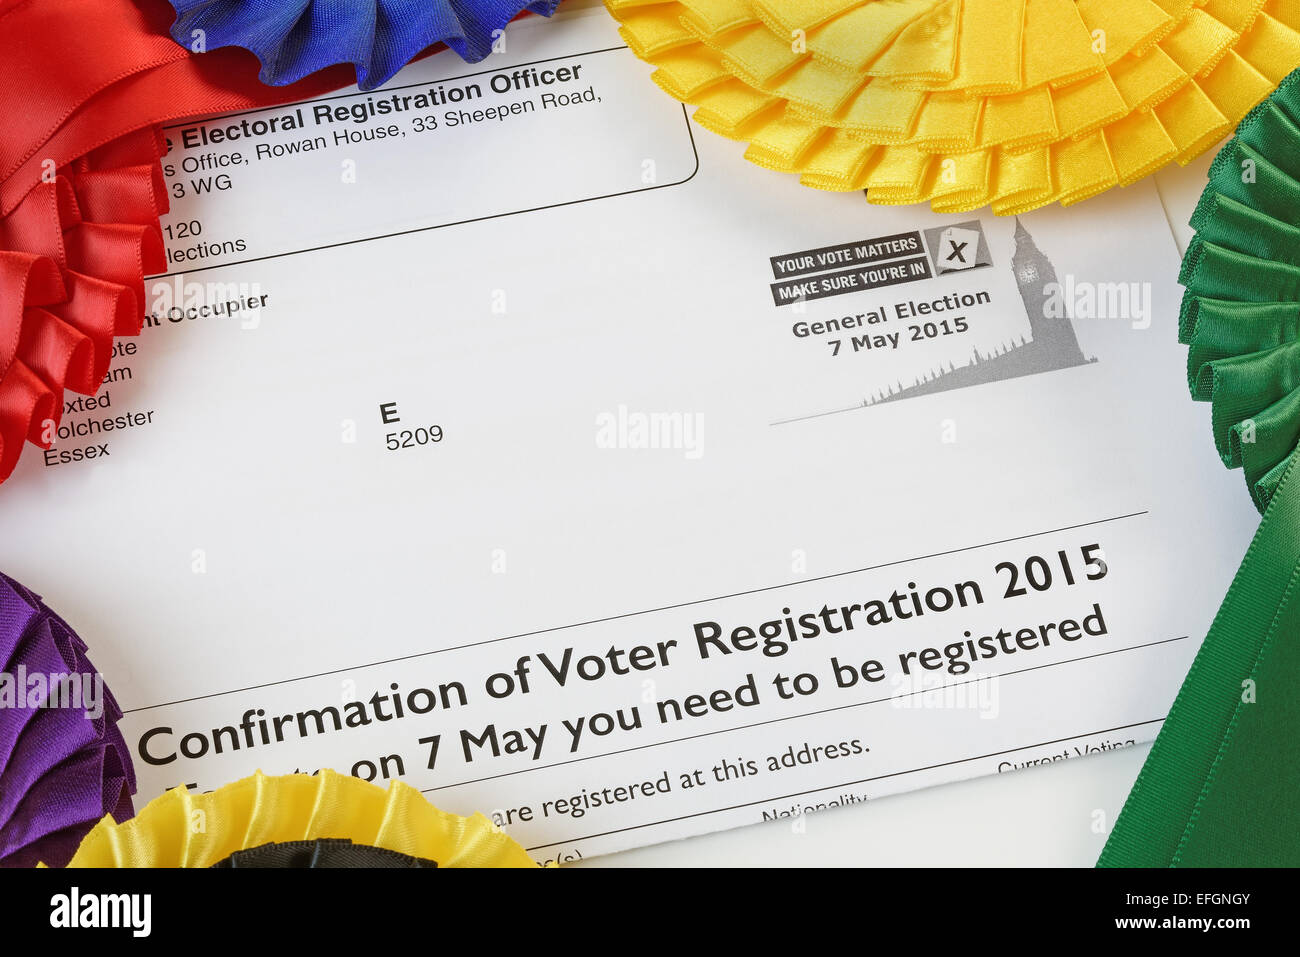 Close up of a Voter Registration Confirmation Letter for the 2015 General Election, surrounded by electoral party rosettes. Stock Photo